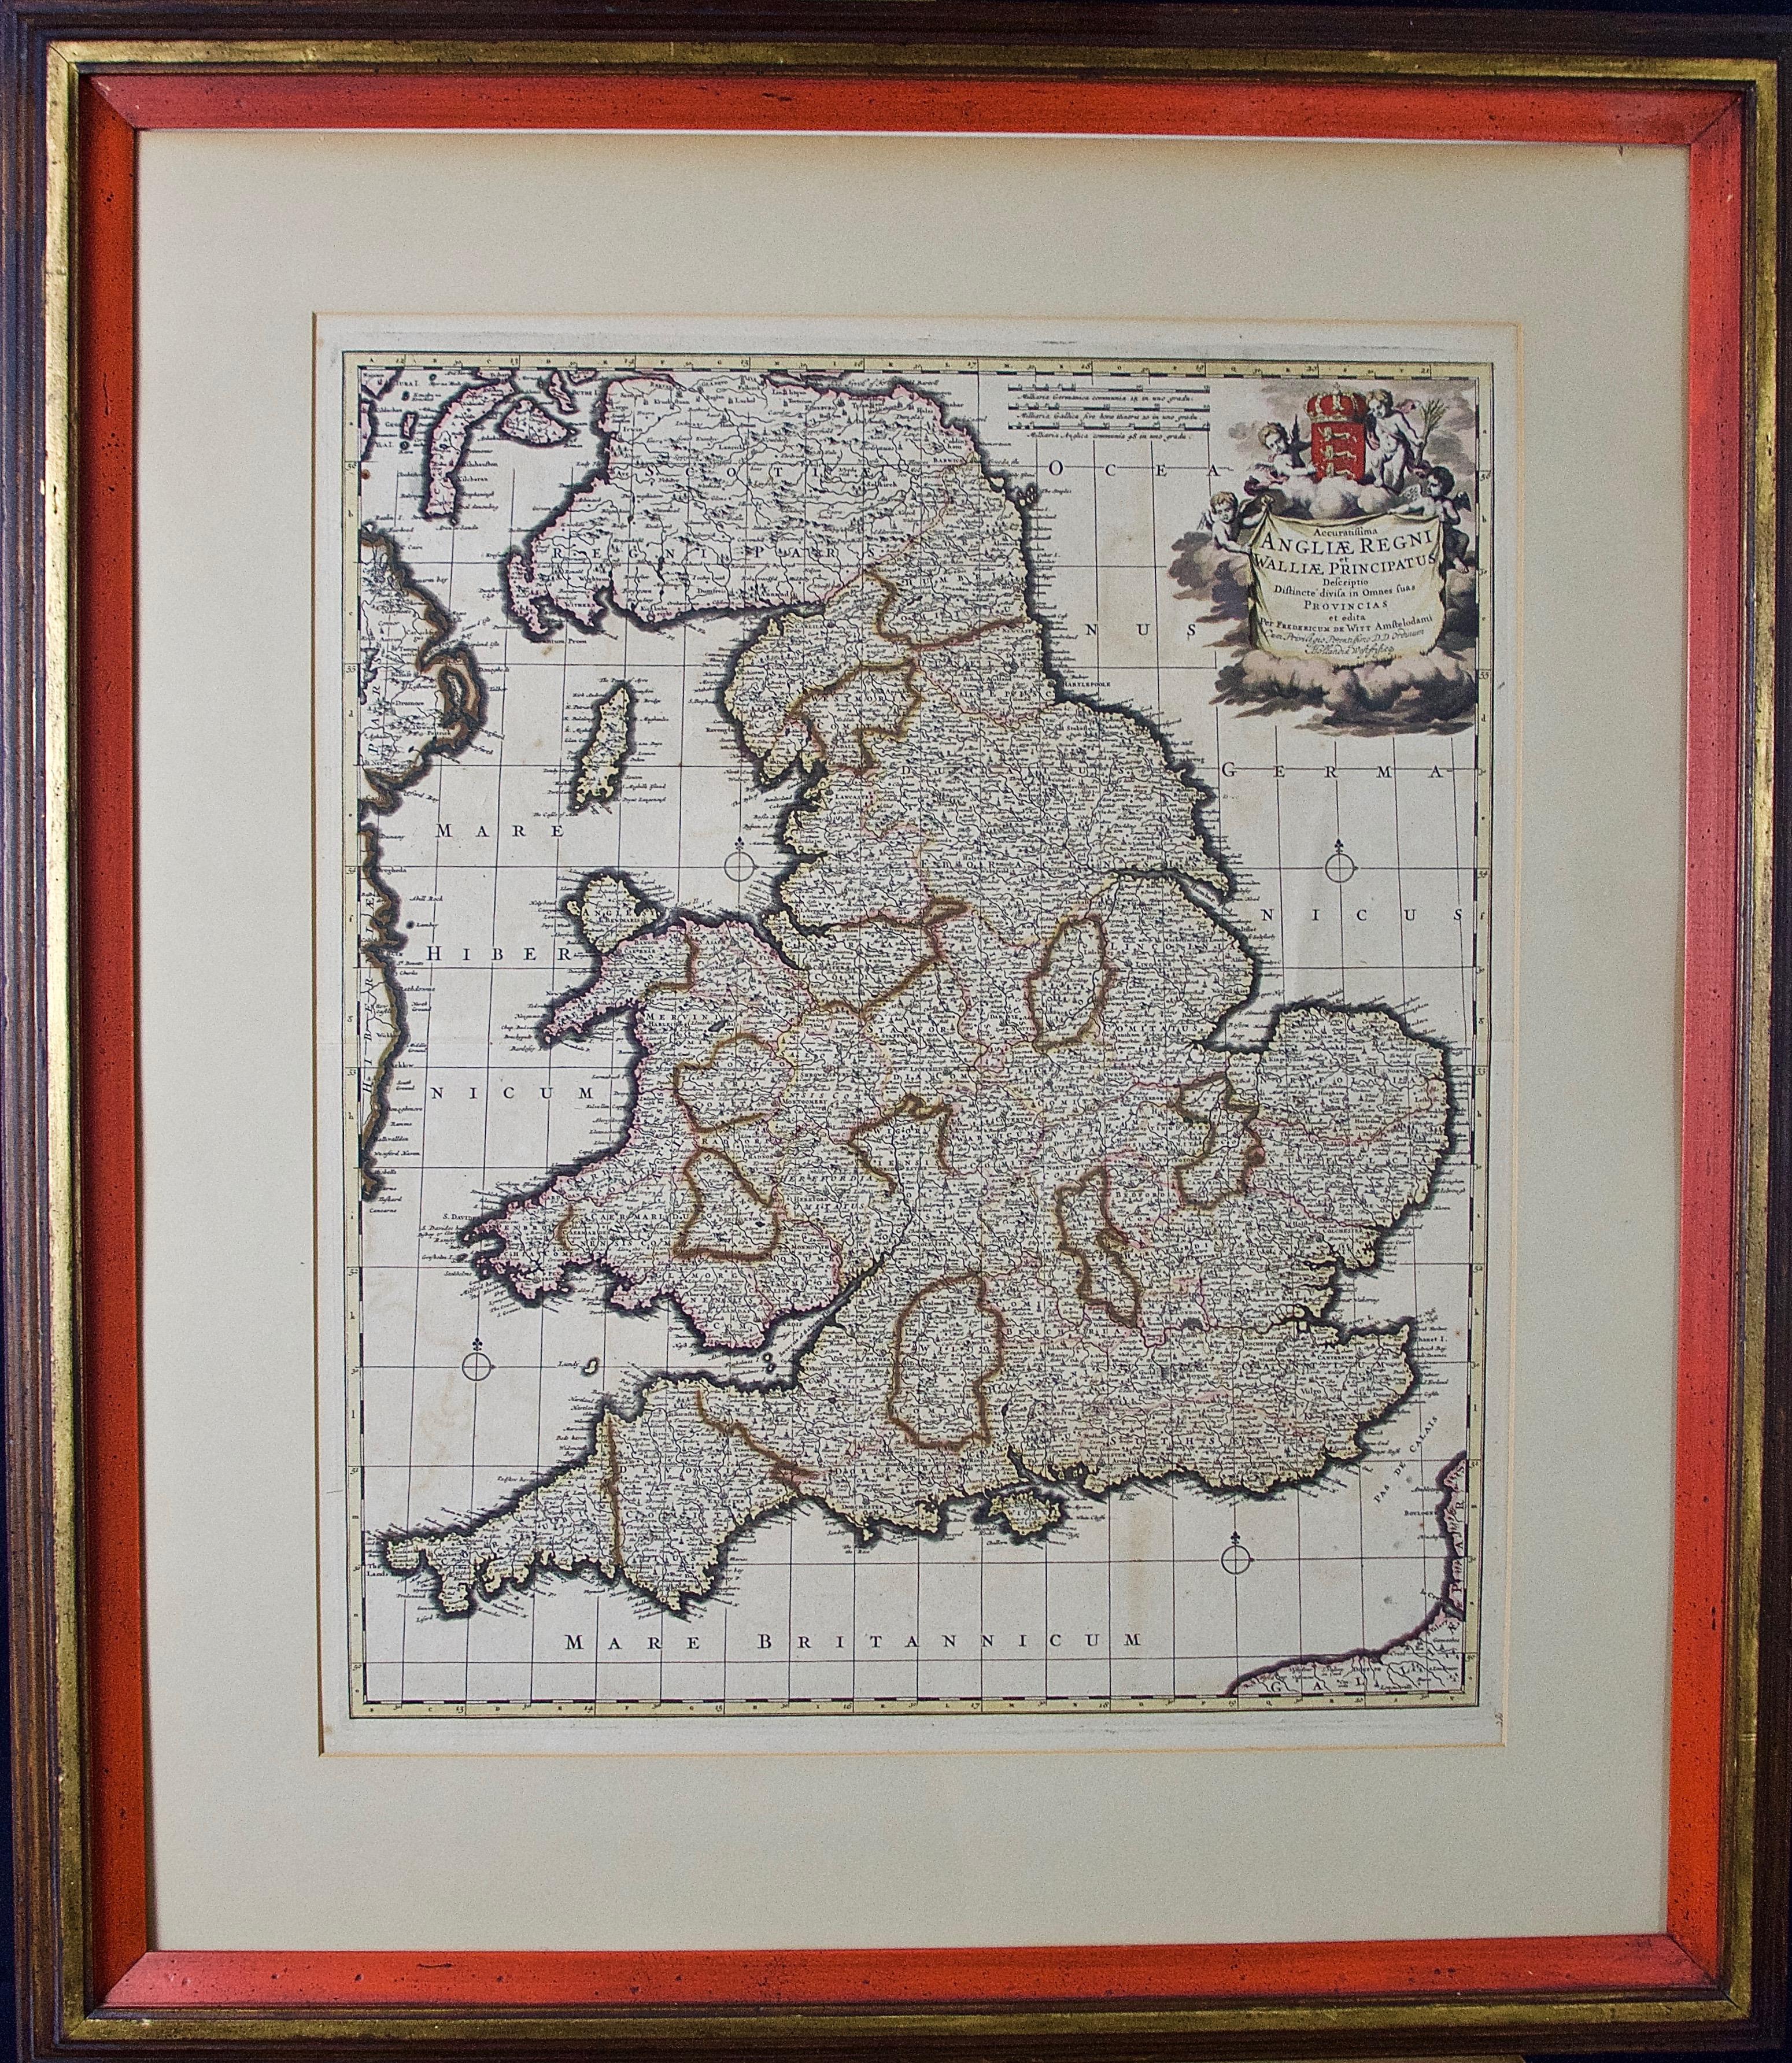 Frederick de Wit Landscape Print - England and the British Isles: A Large 17th Century Hand-colored Map by de Wit